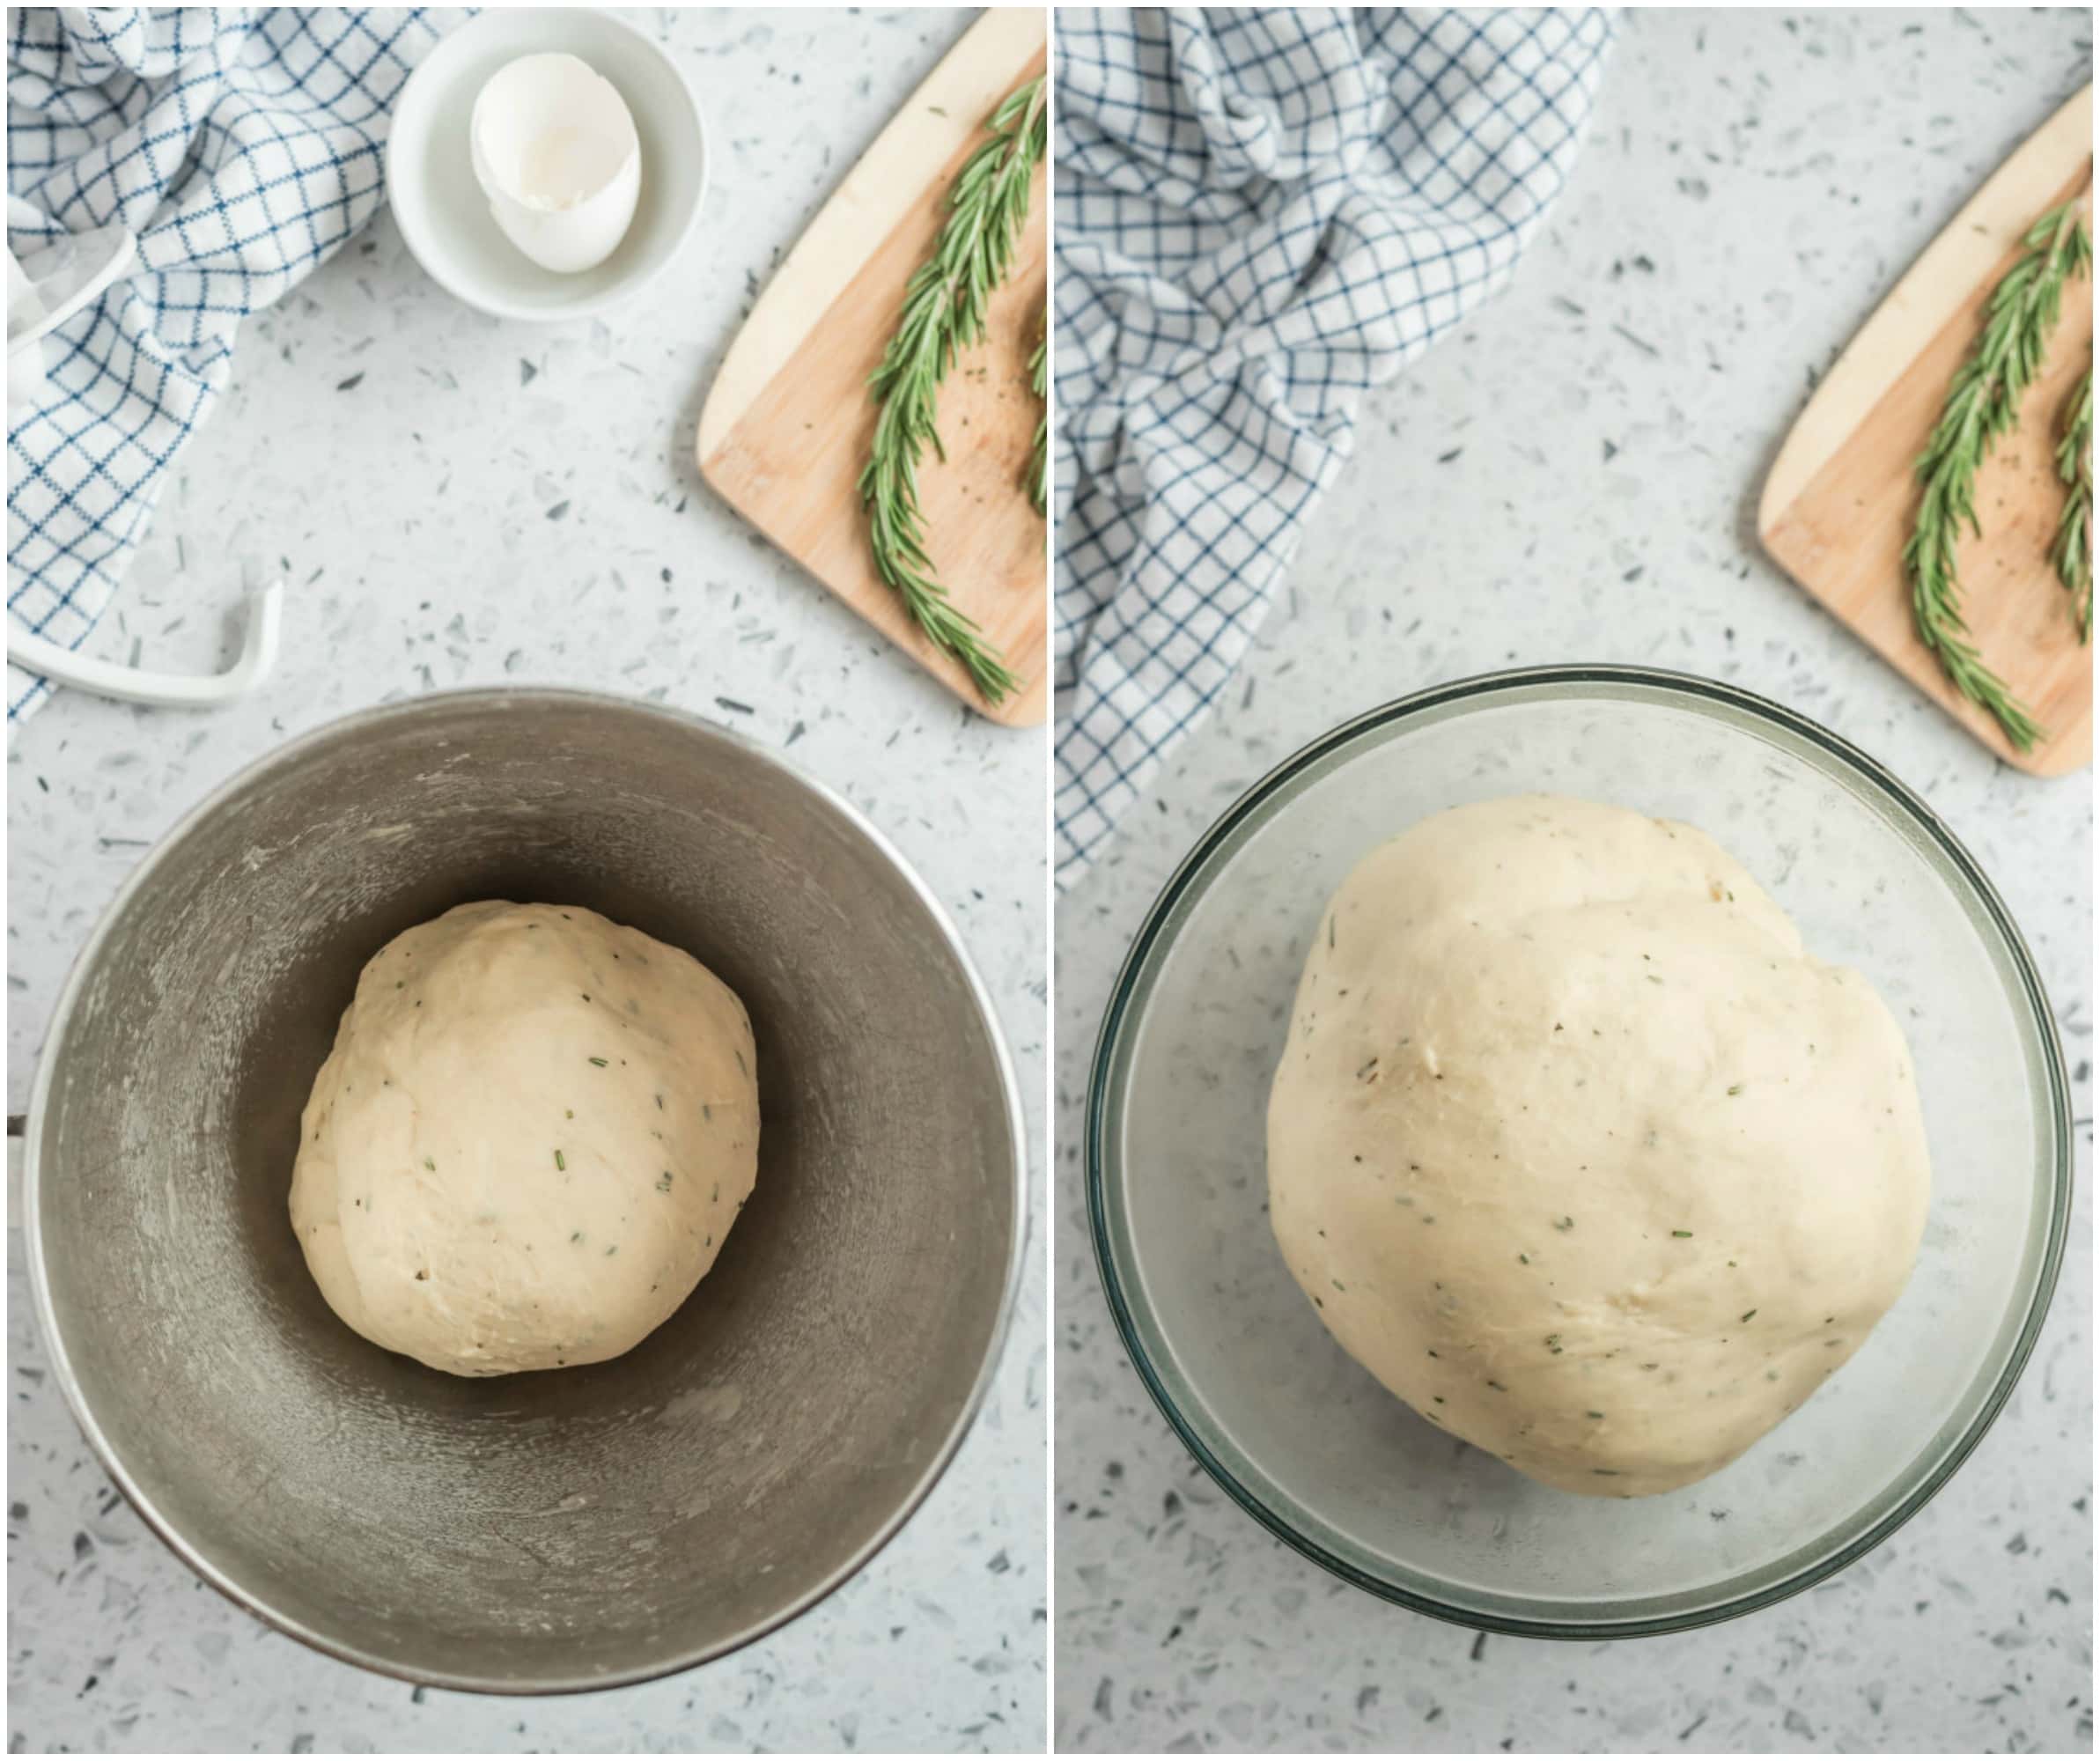 dough for making rolls in a bowl and then a bowl showing the risen dough